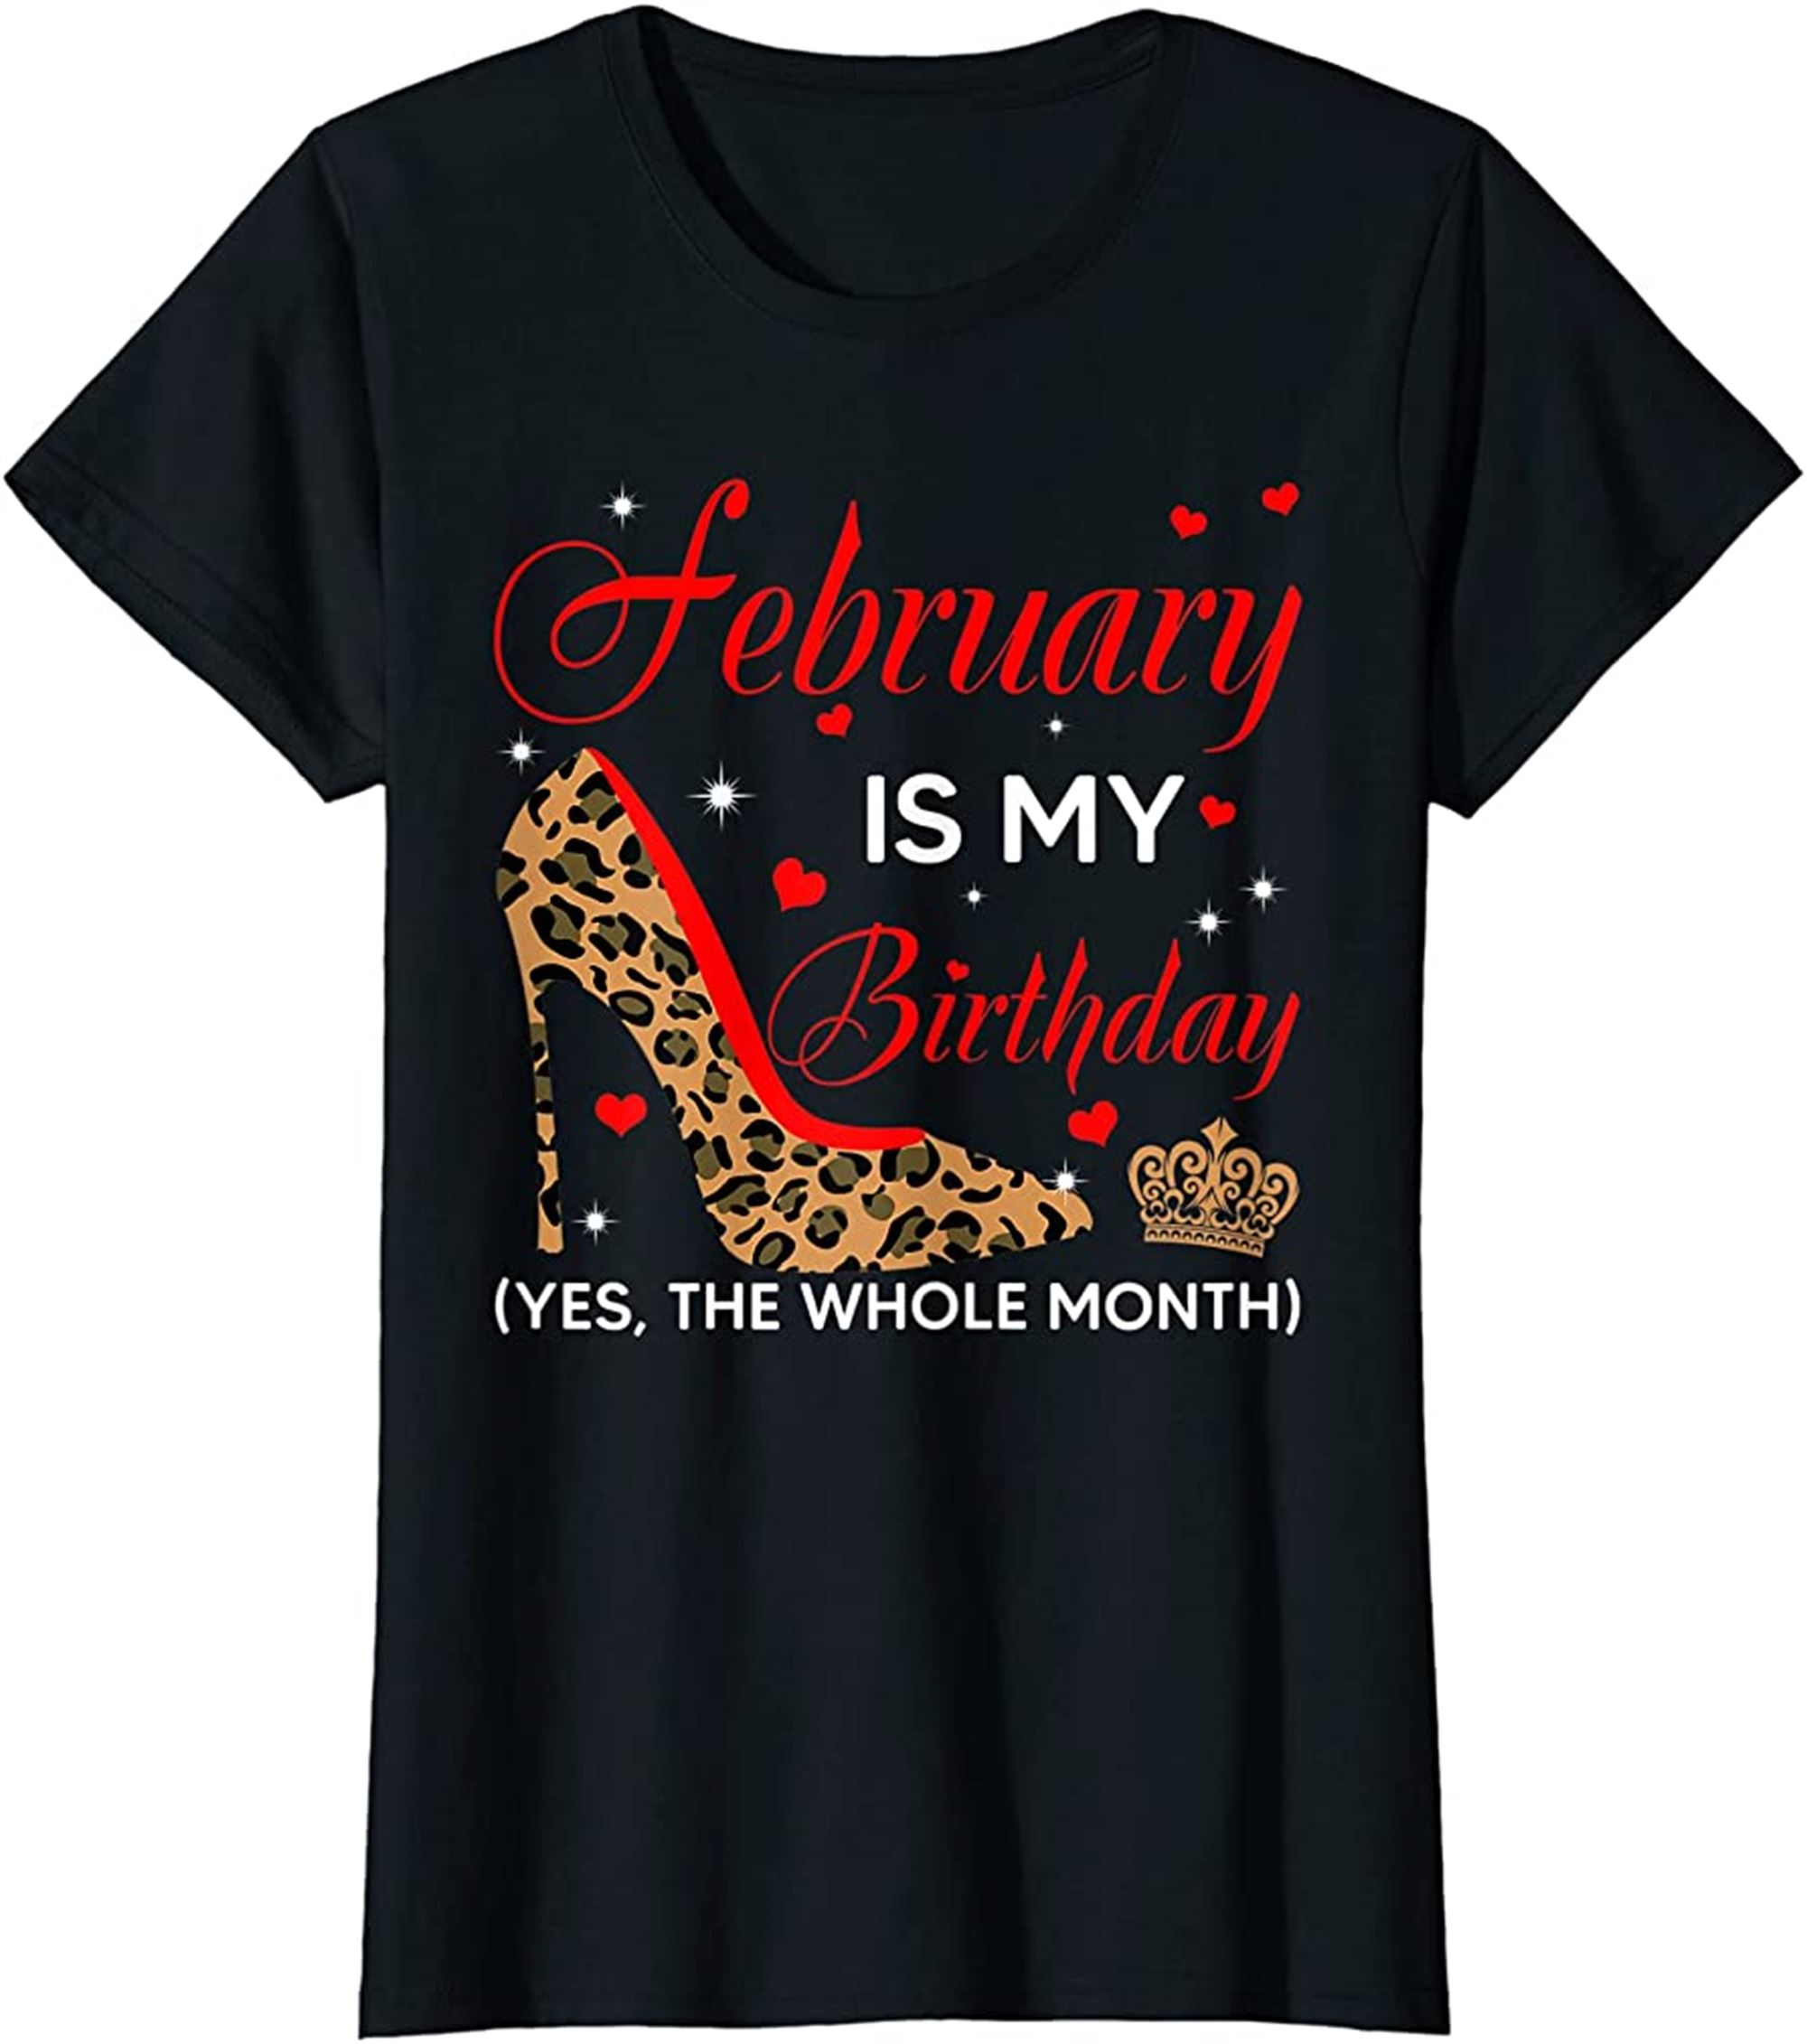 Womens February Is My Birthday Yes The Whole Month High Heel T-shirt Full Size Up To 5xl